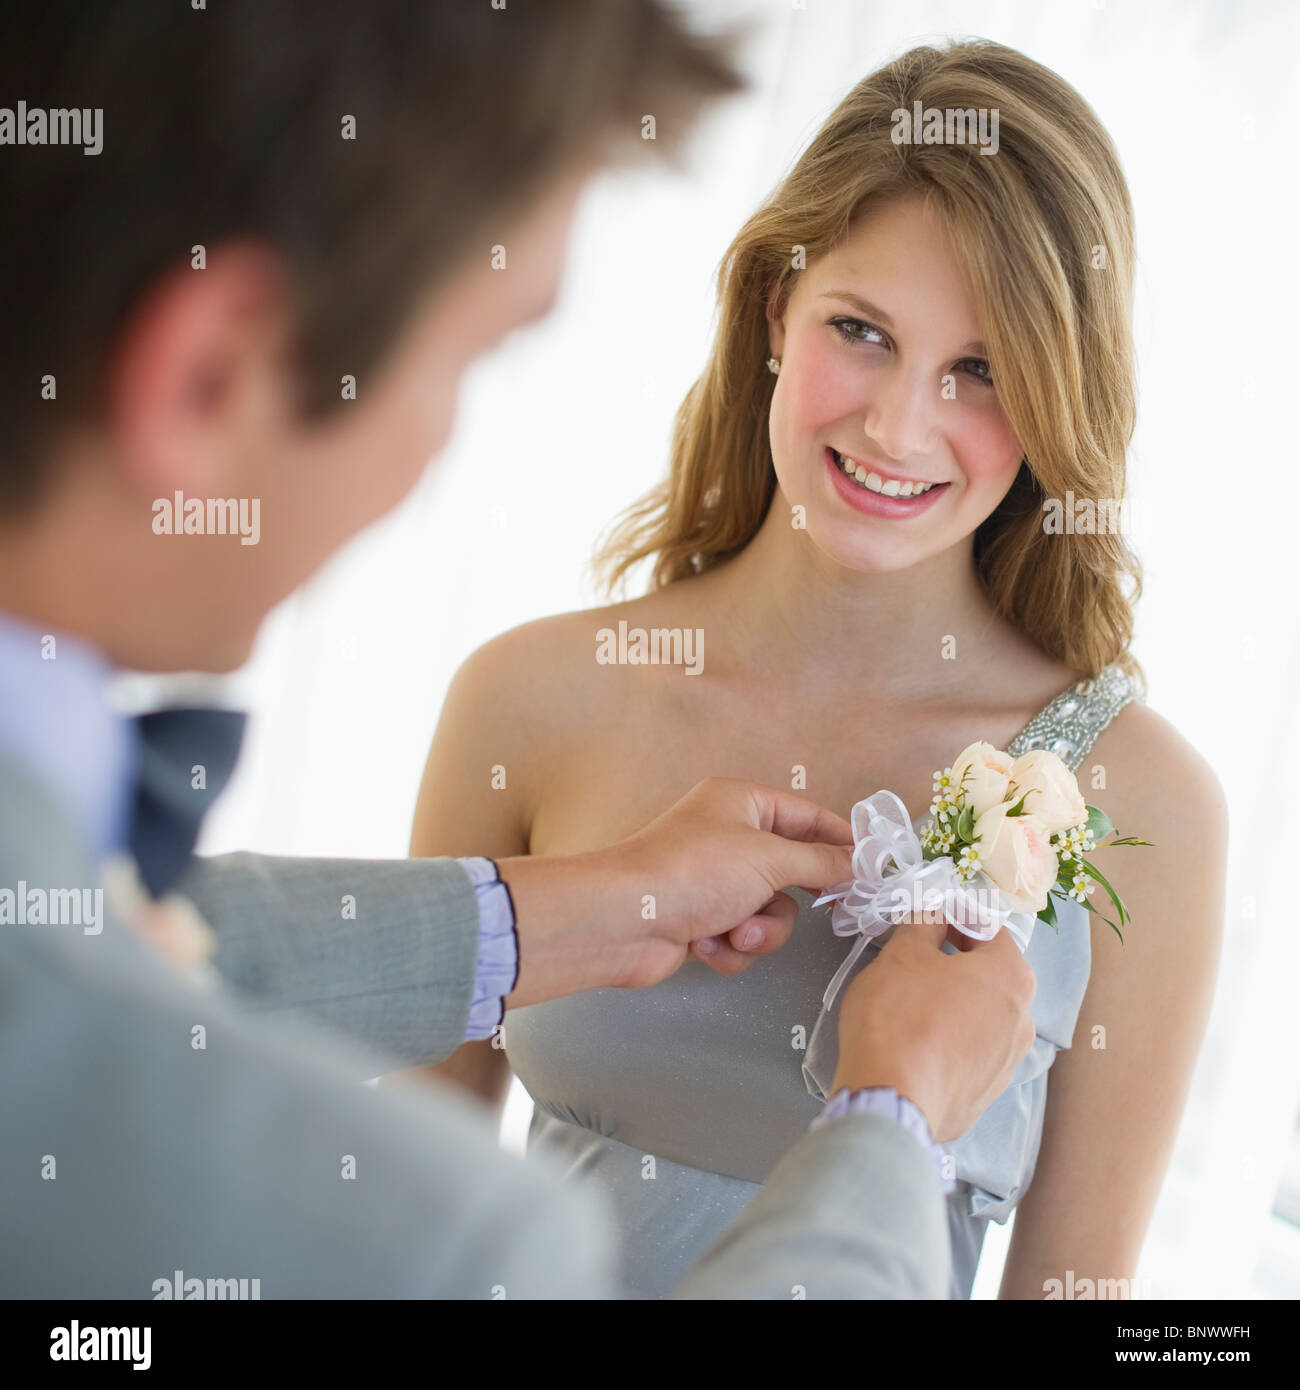 Man pinning corsage on his date's prom dress Stock Photo